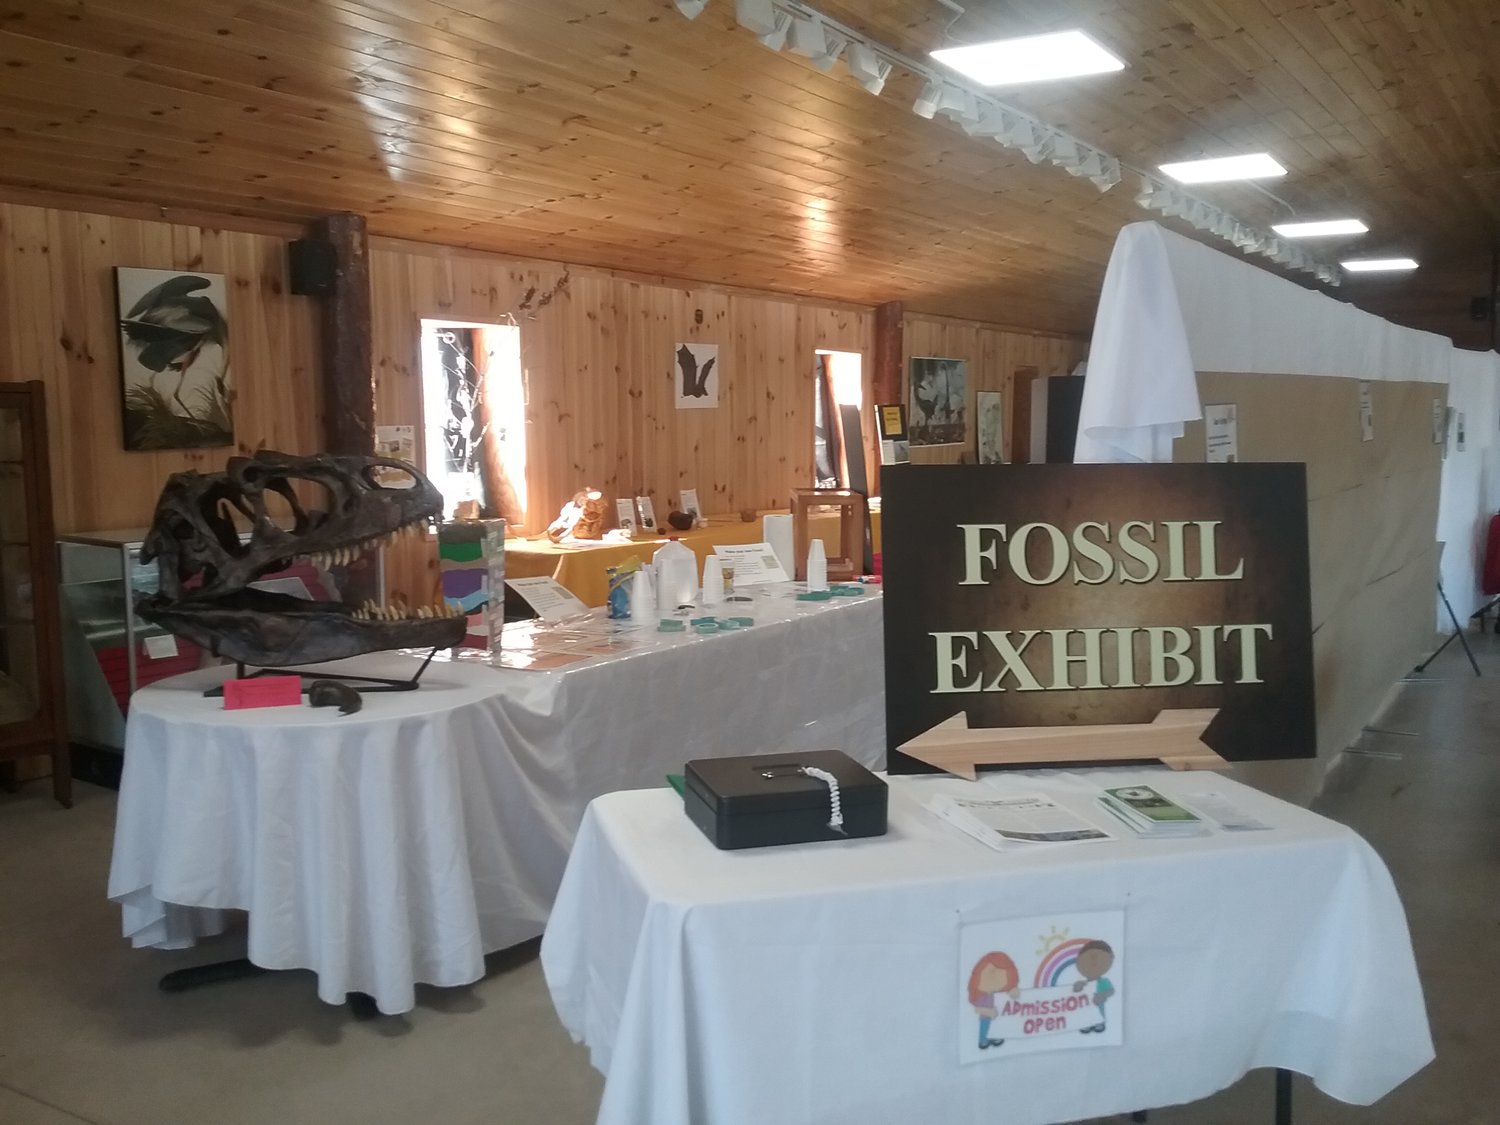 The Great Swamp Conservancy’s fossil exhibit runs from 9 a.m. to 4 p.m. Monday through Friday at 8375 N. Main St. on Canastota.